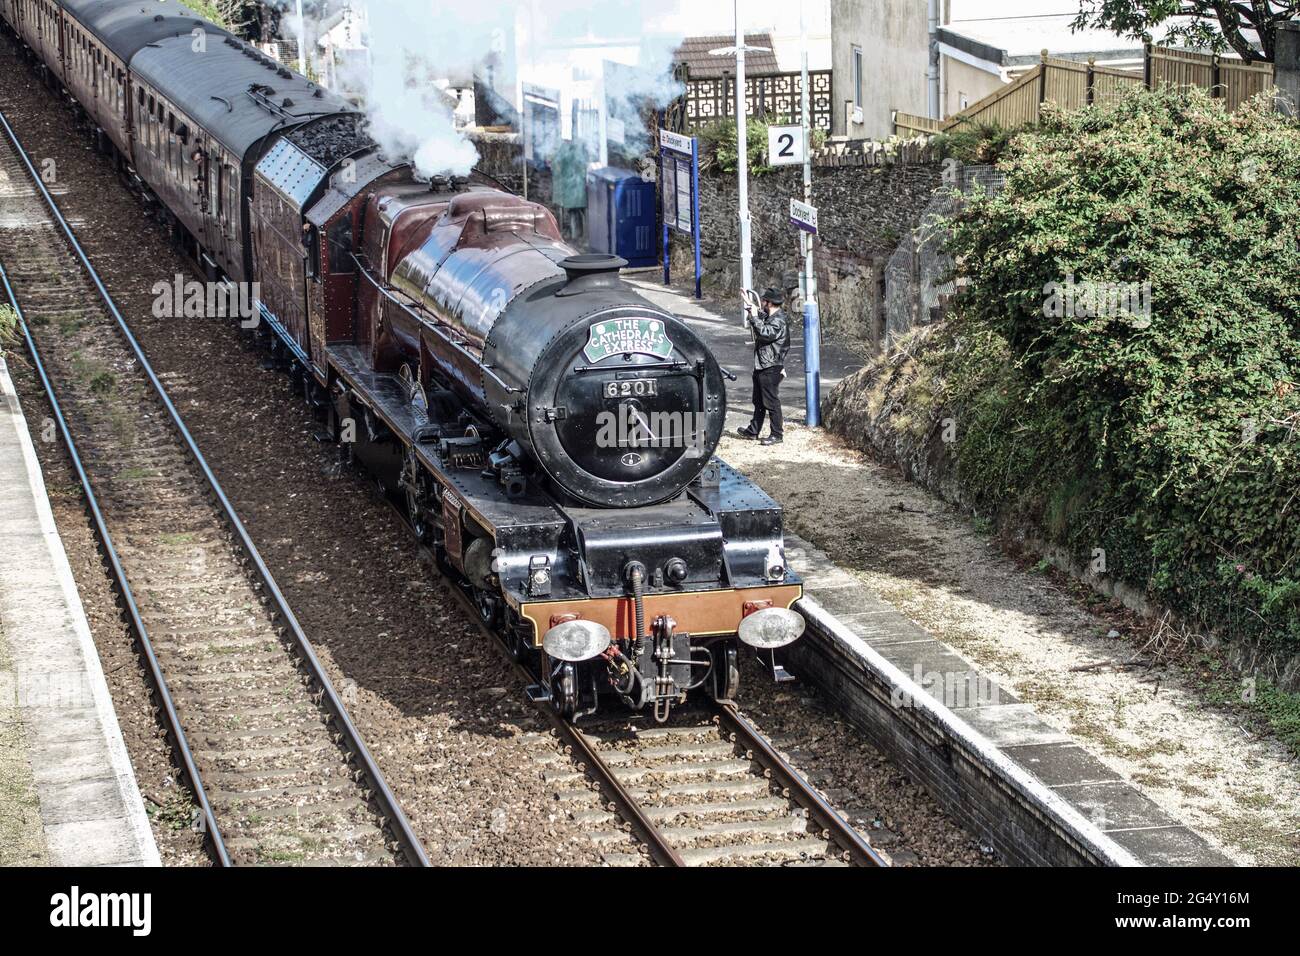 The Cathedrals Express Passing through Dockyard Halt station in Plymouth. Train pulled by the Princess Elizabeth locomotive 6201. A wellwisher waves t Stock Photo